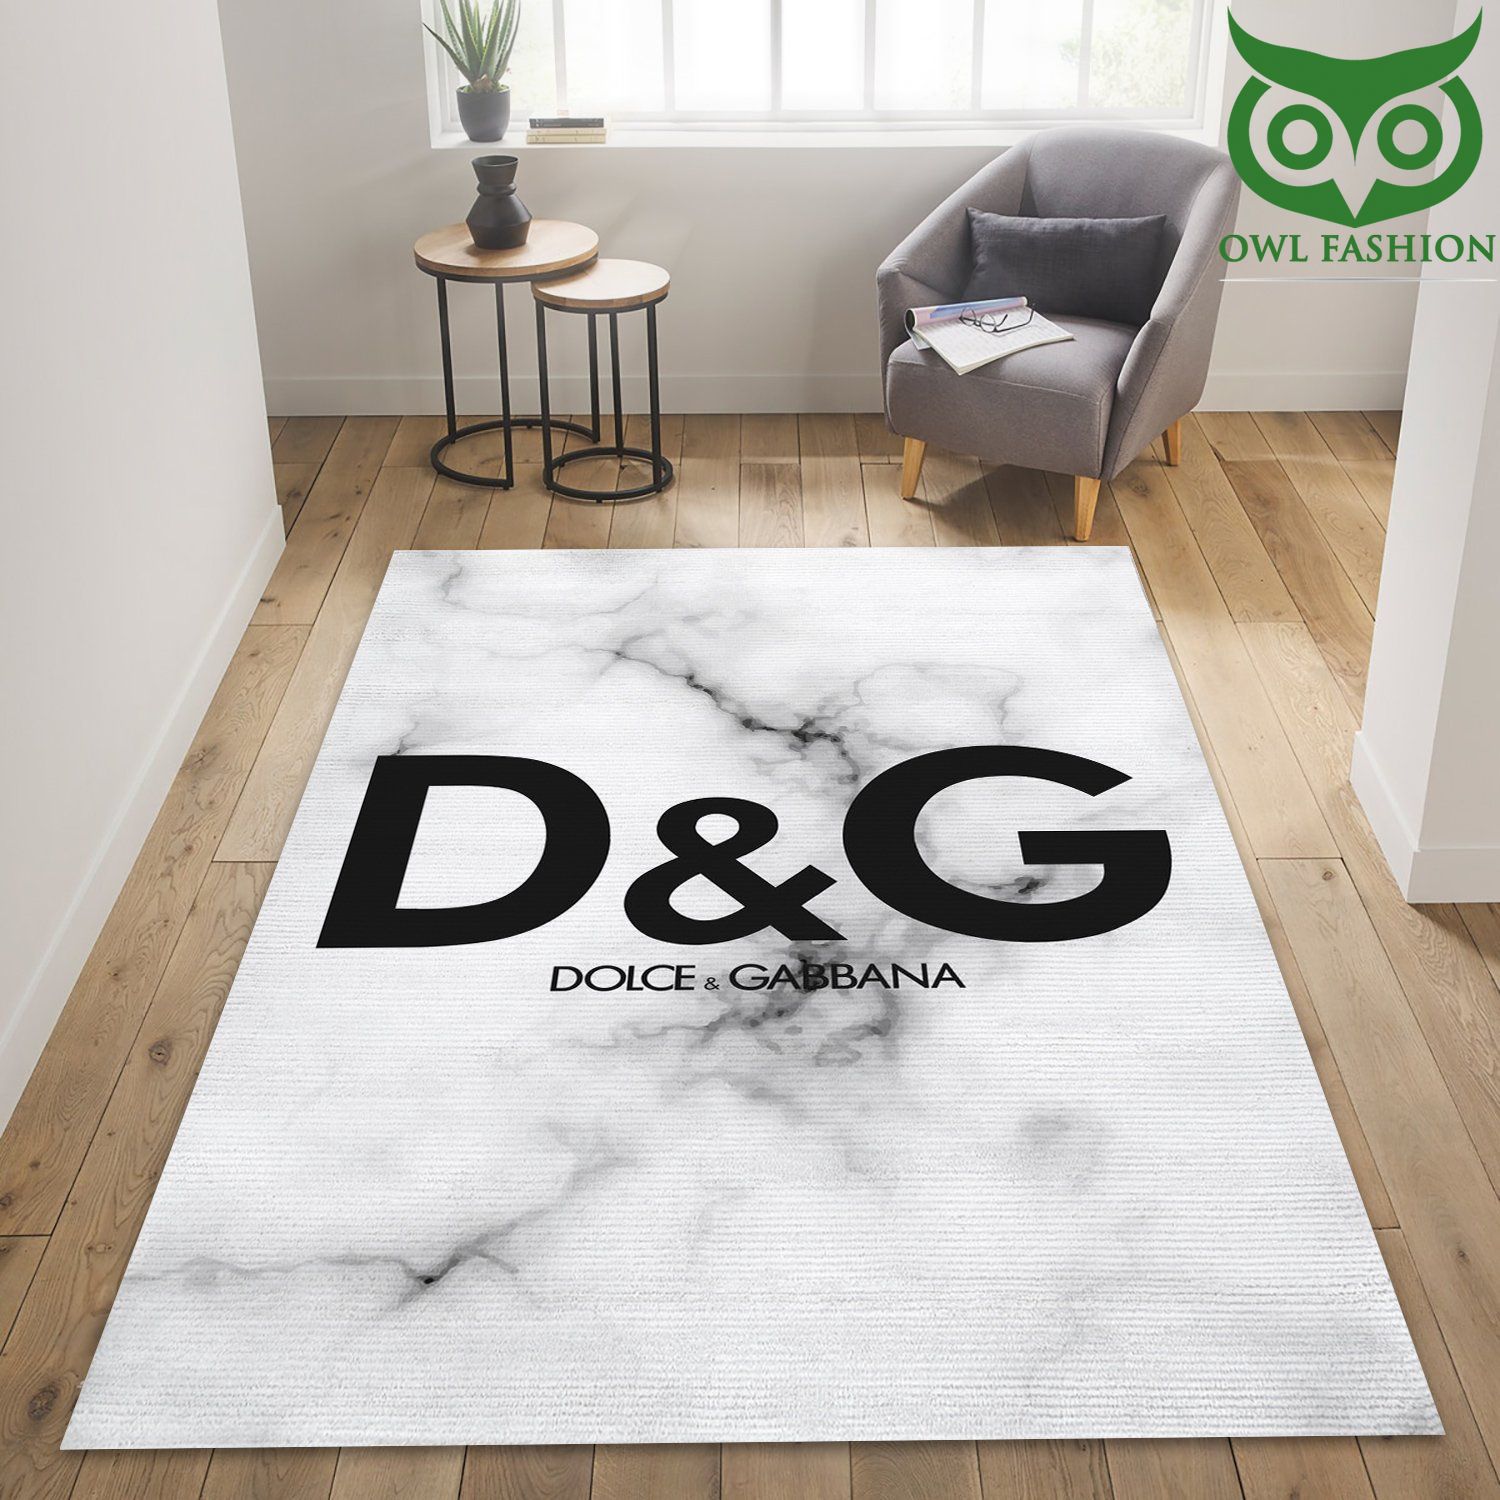 Dolce And Gabbana carpet rug Home and floor Decor